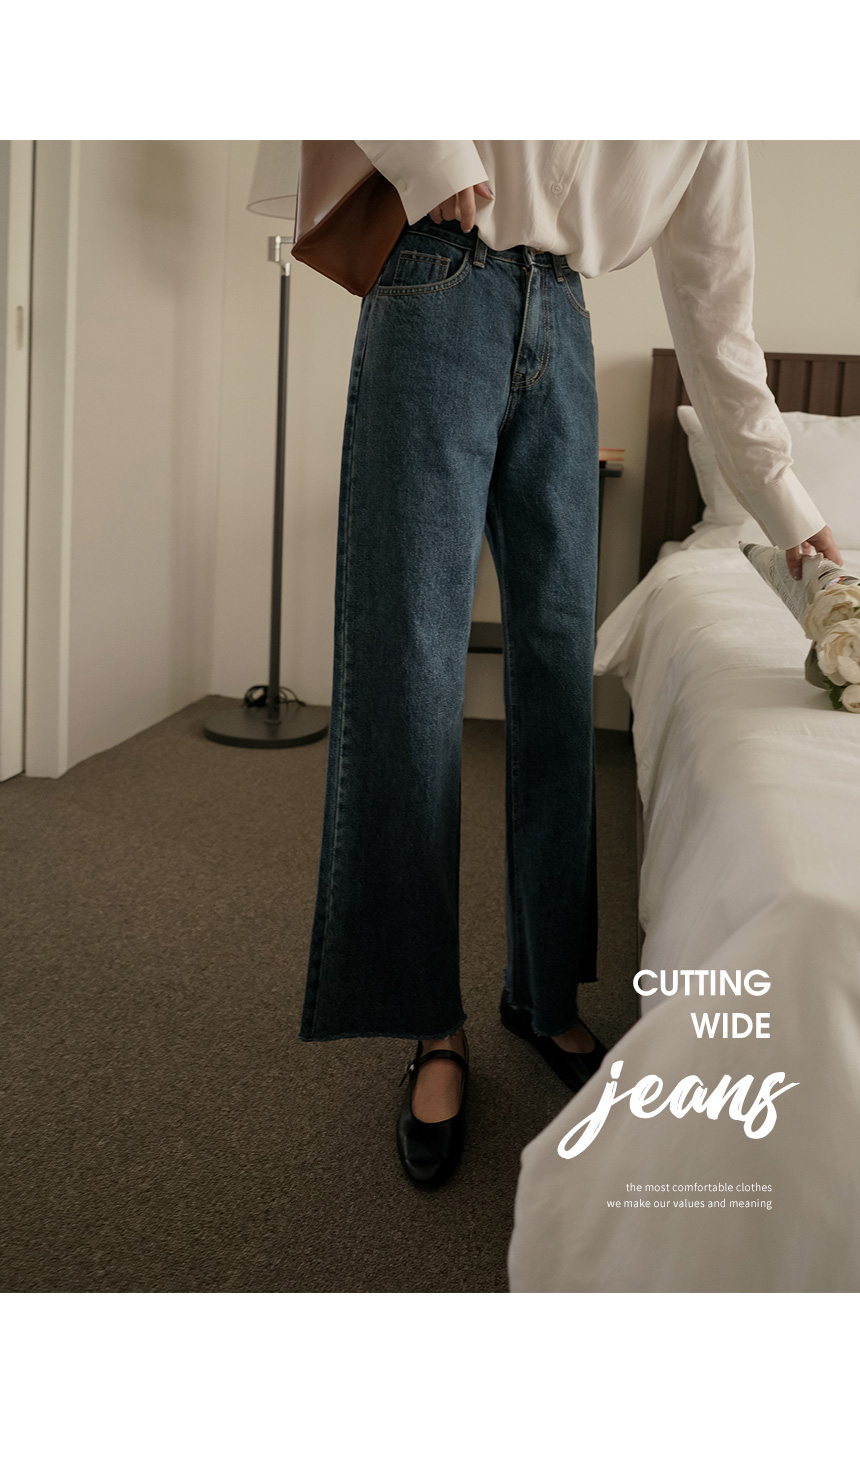 JUSTONE Nut Stretch Cutting Wide Jeans | KOODING